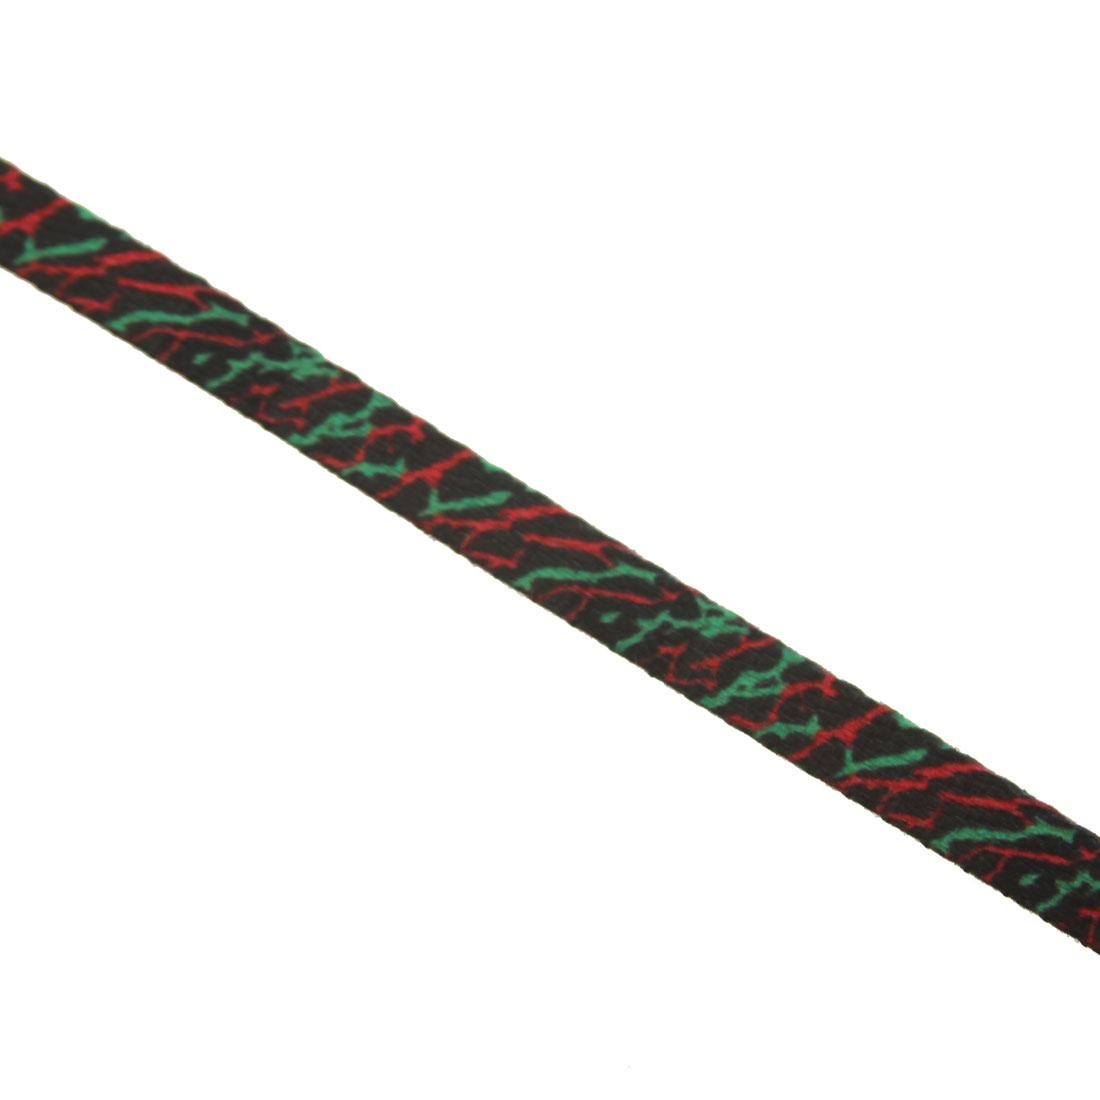 $6 Starks Laces Tribe Shoelaces shoestrings 0036-45Inch-1S 